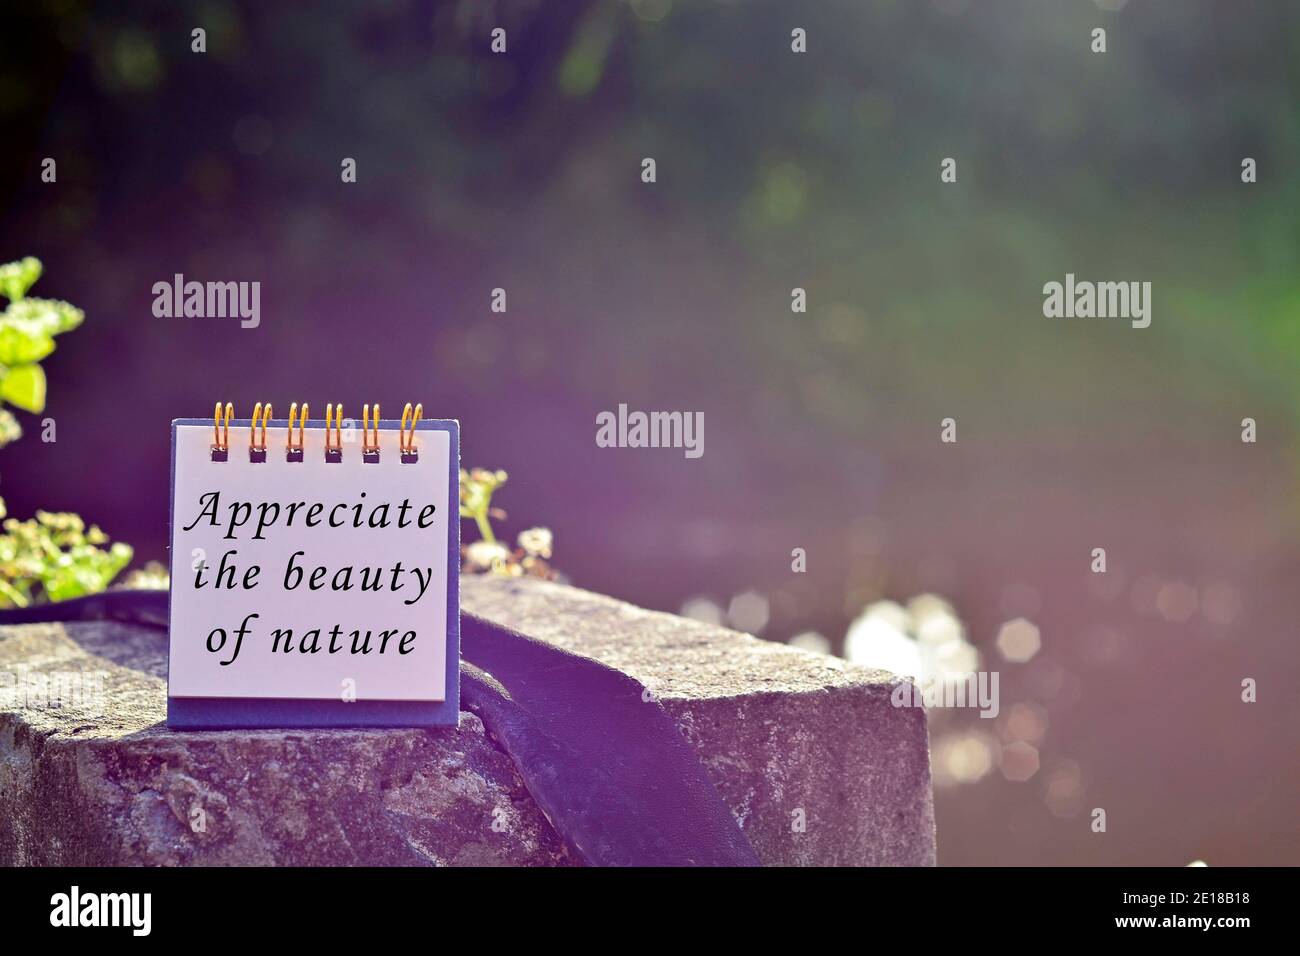 Appreciate the beauty of nature text written on note with blurred background Stock Photo